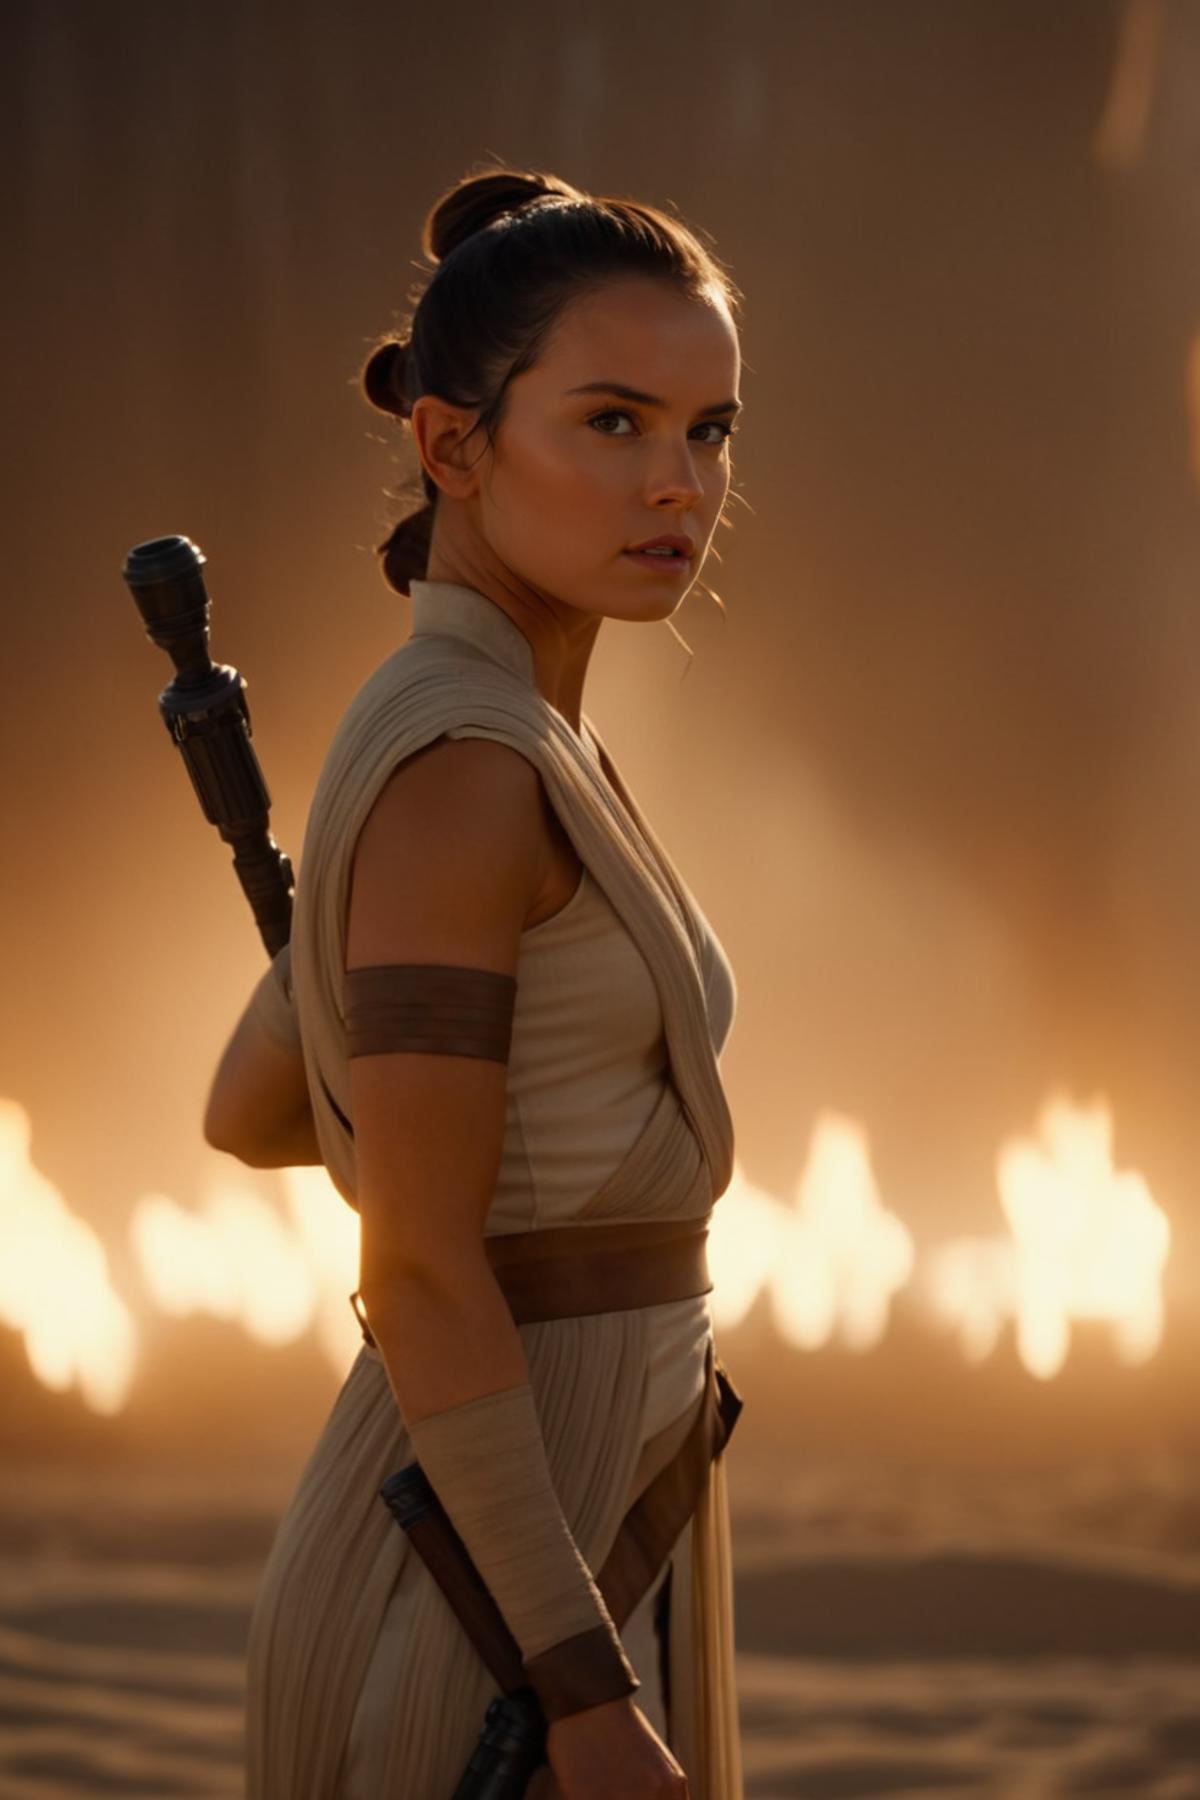 Rey XL image by strategenblume